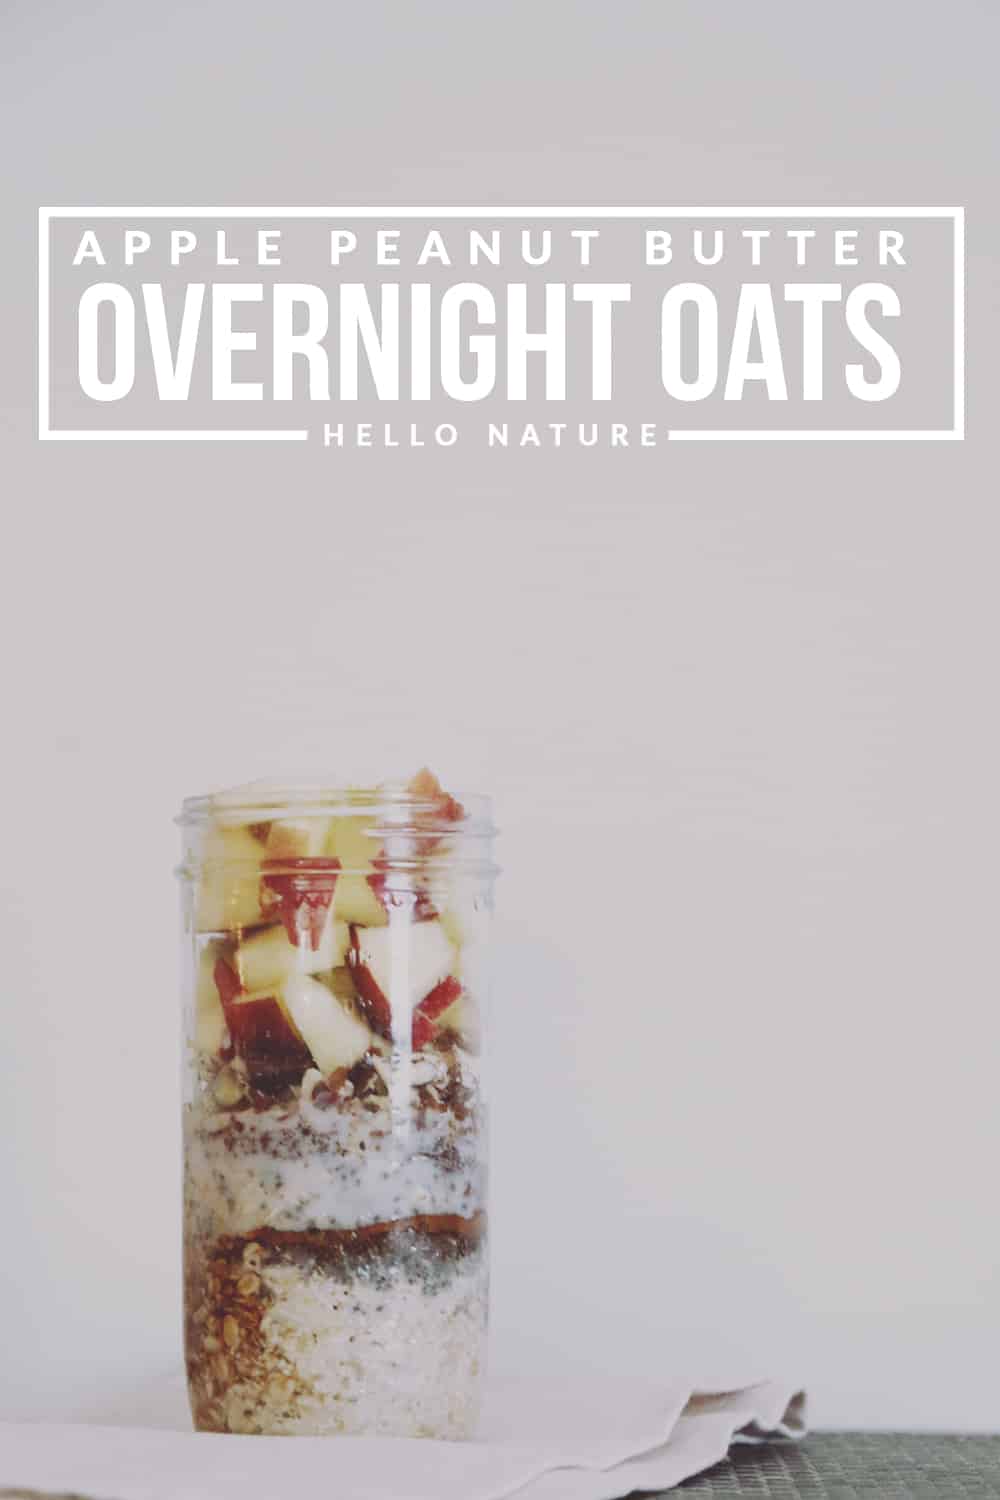 Start your day off right with this simple, protein packed apple peanut butter overnight oats recipe. Great for busy mornings!